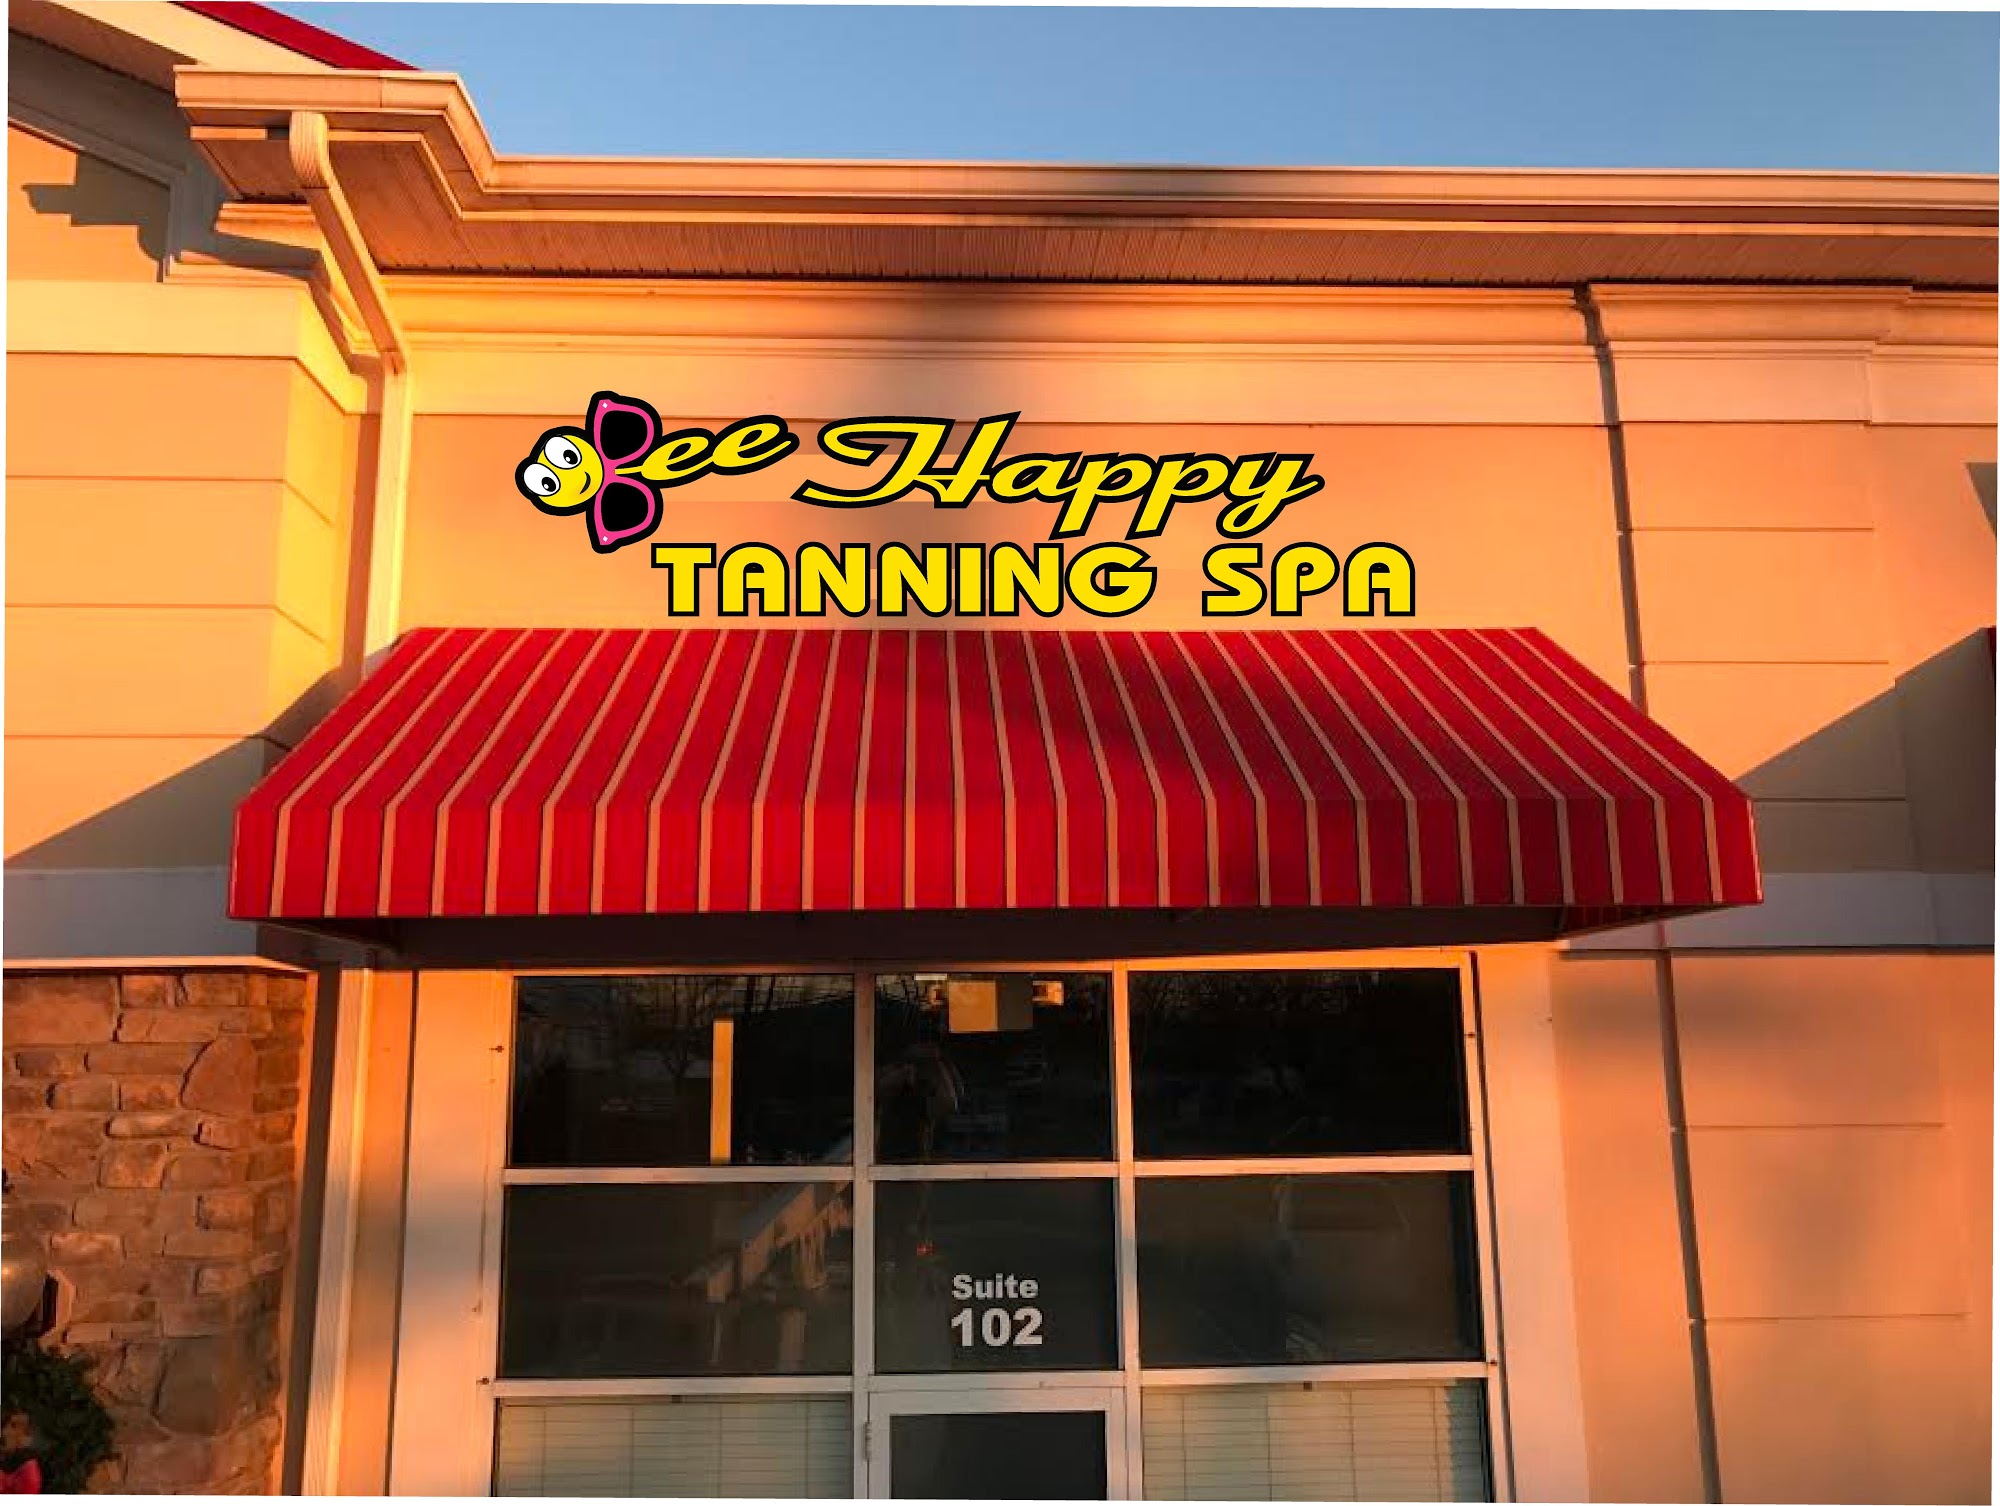 Bee Happy Tanning Spa